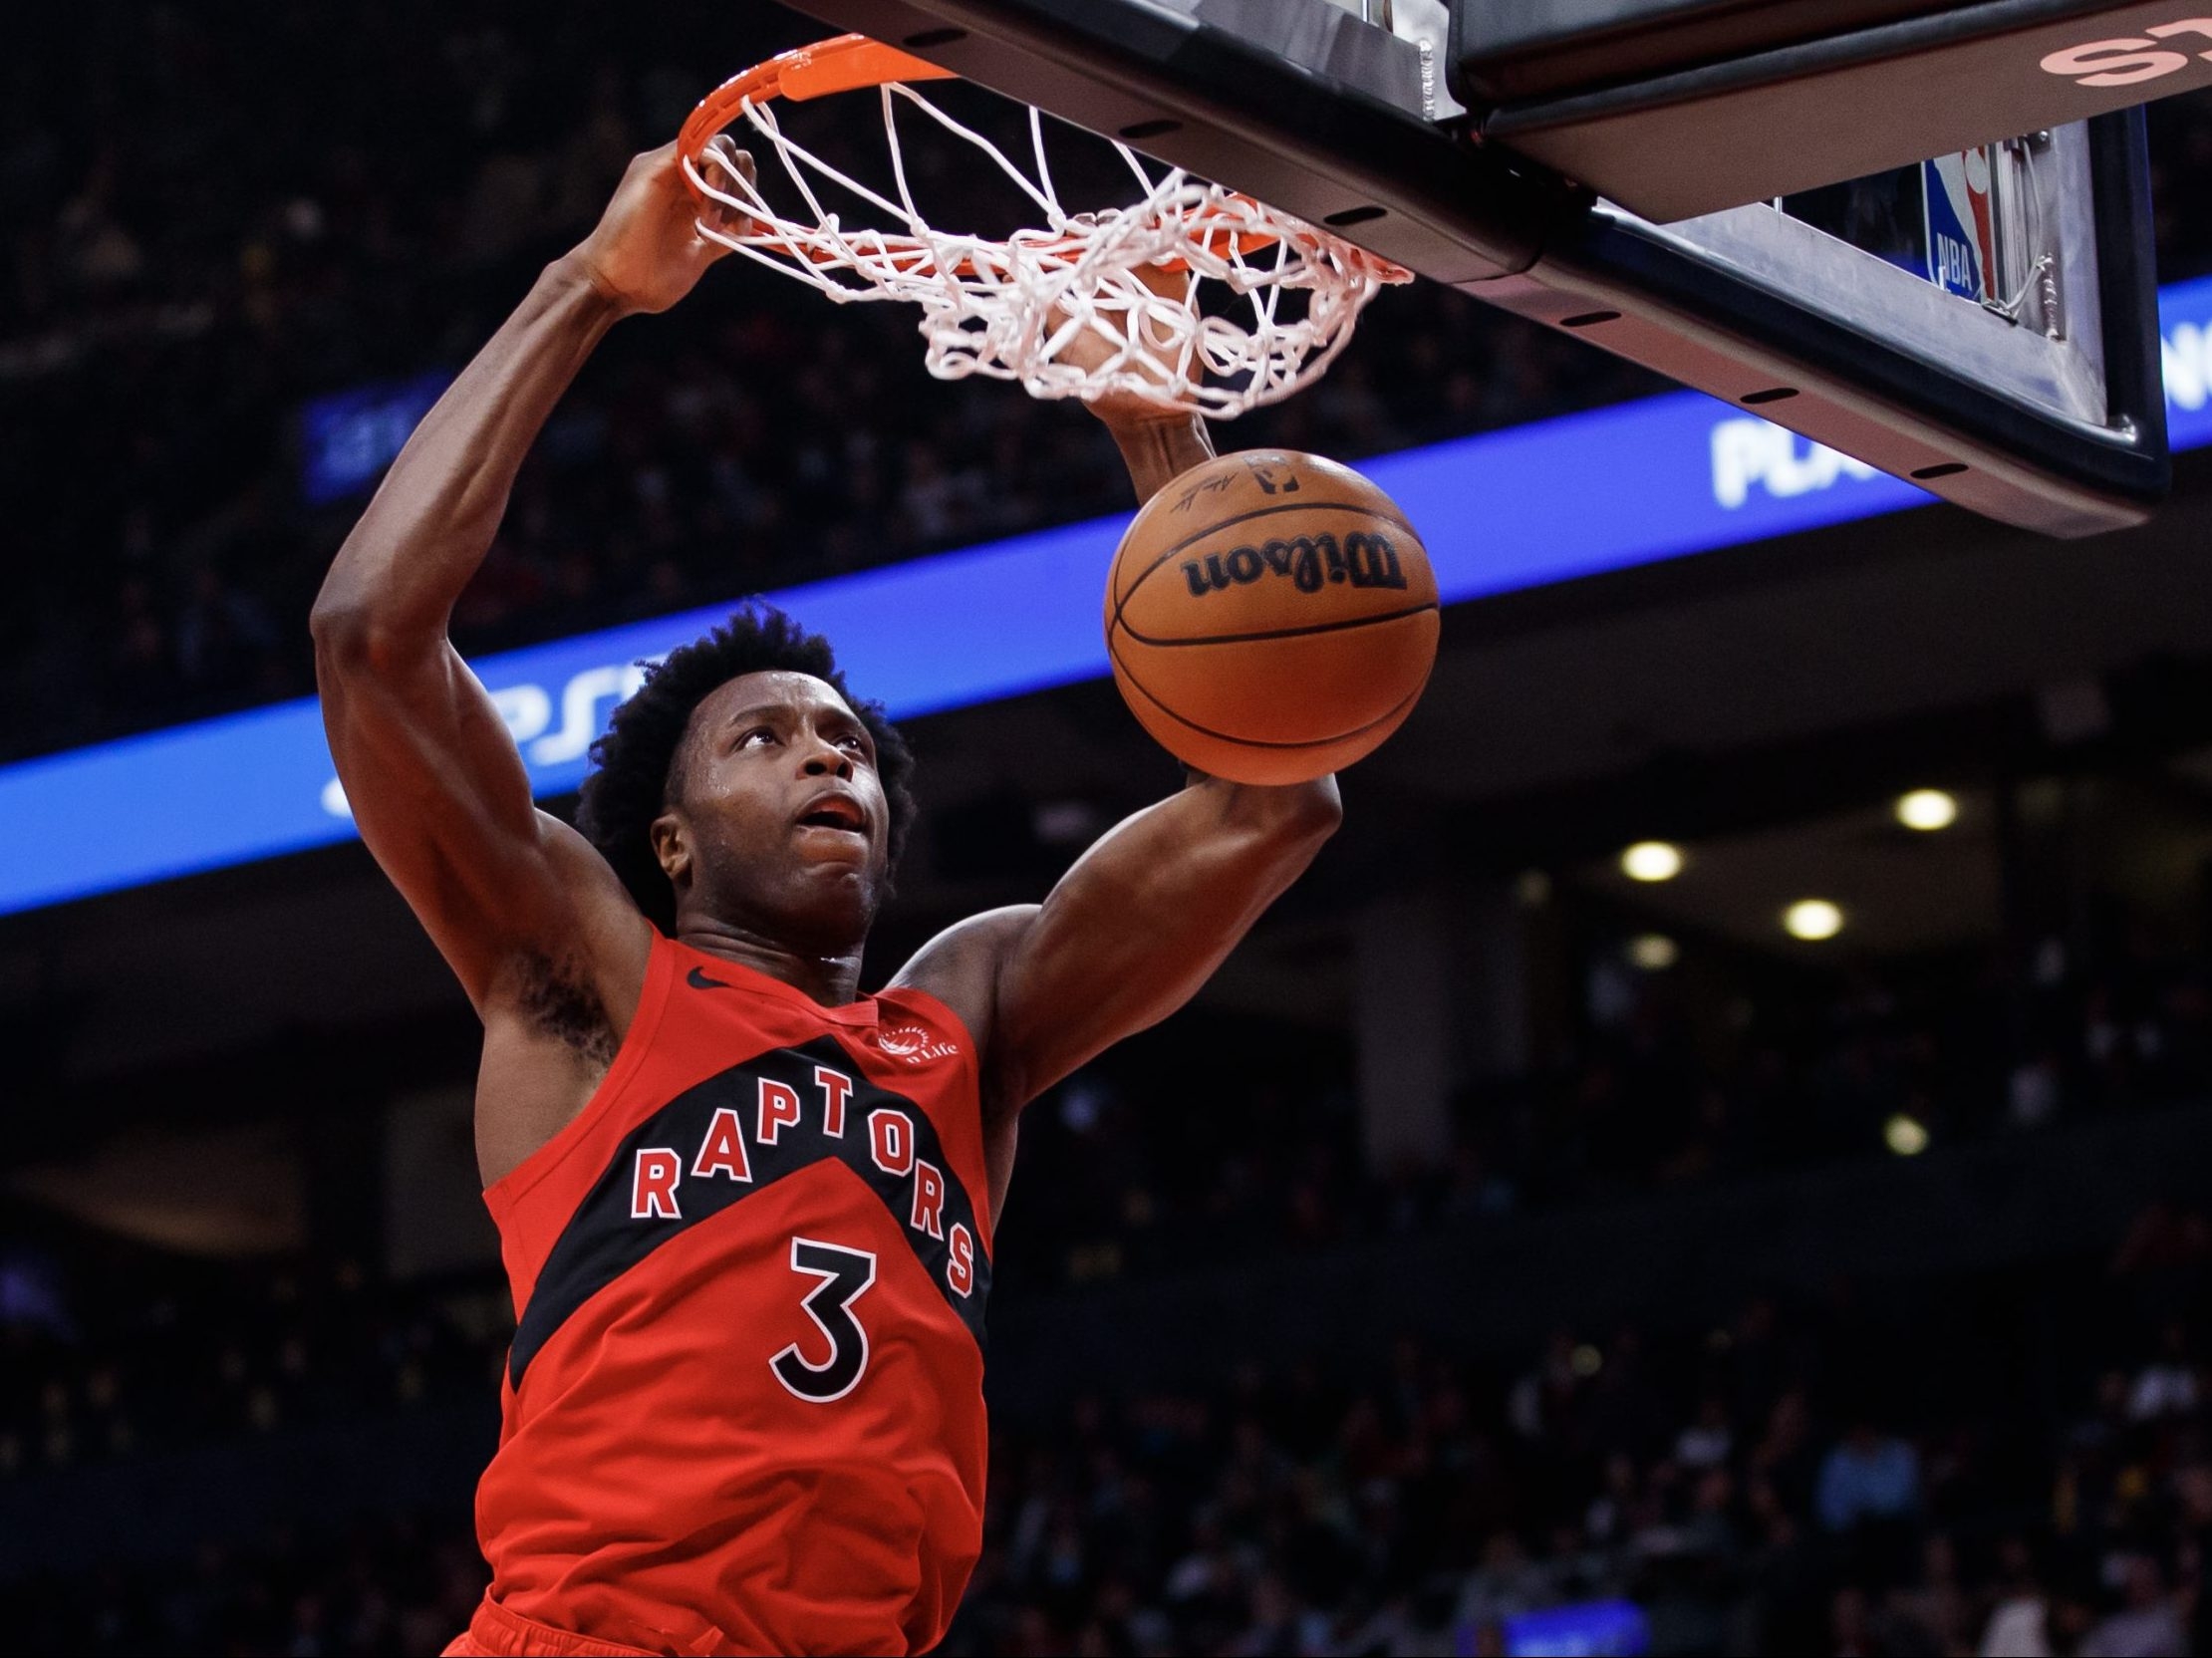 Raptors will have to get by without OG Anunoby for at least a week